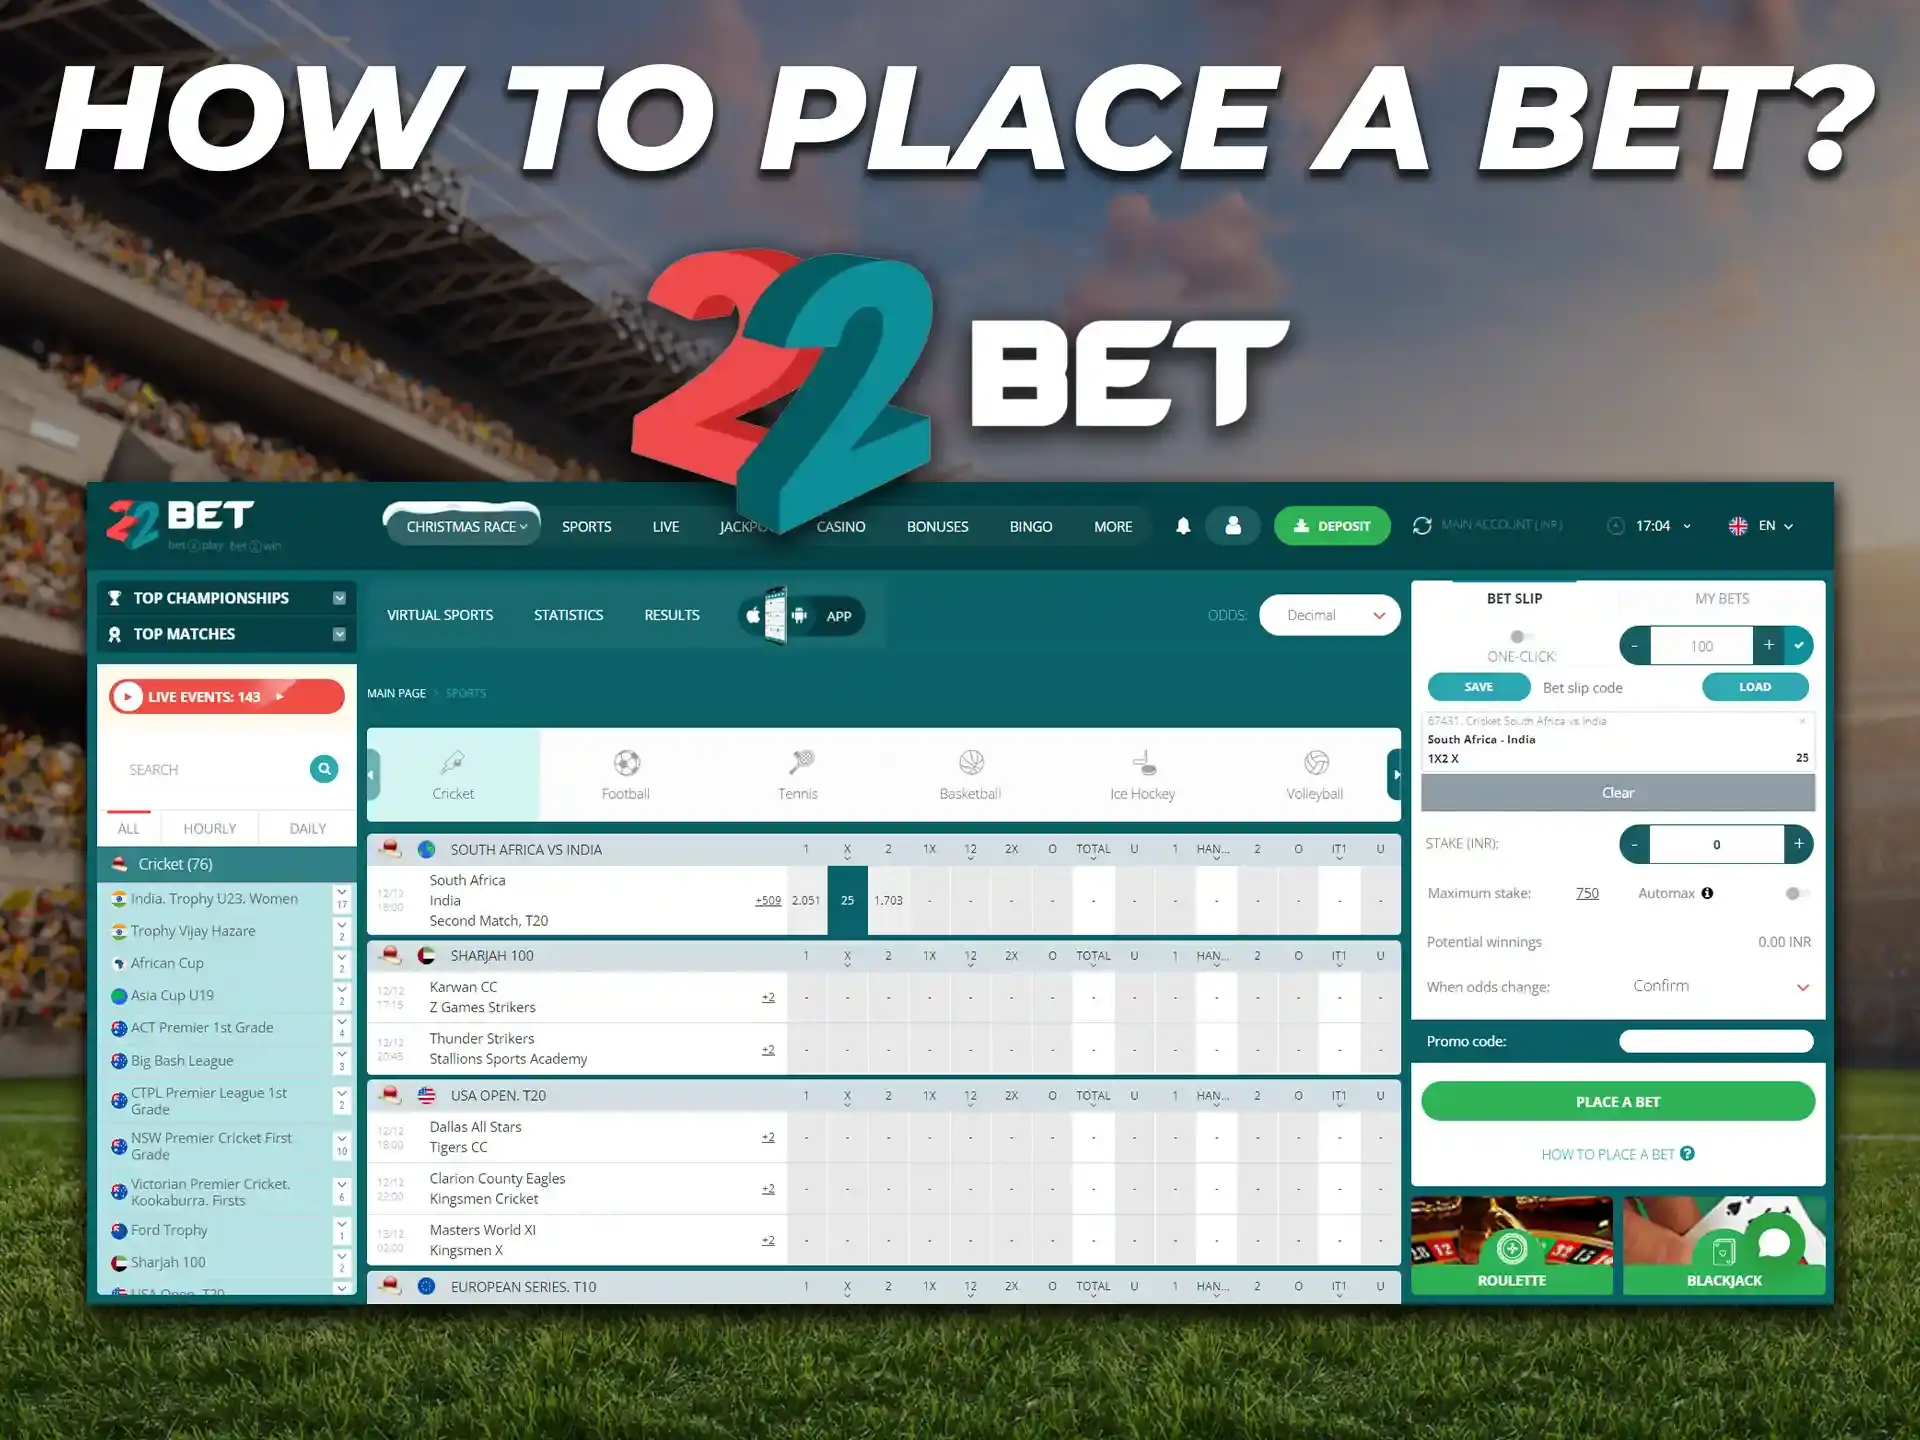 Step-by-step instructions on how to bet on the 22Bet platform.